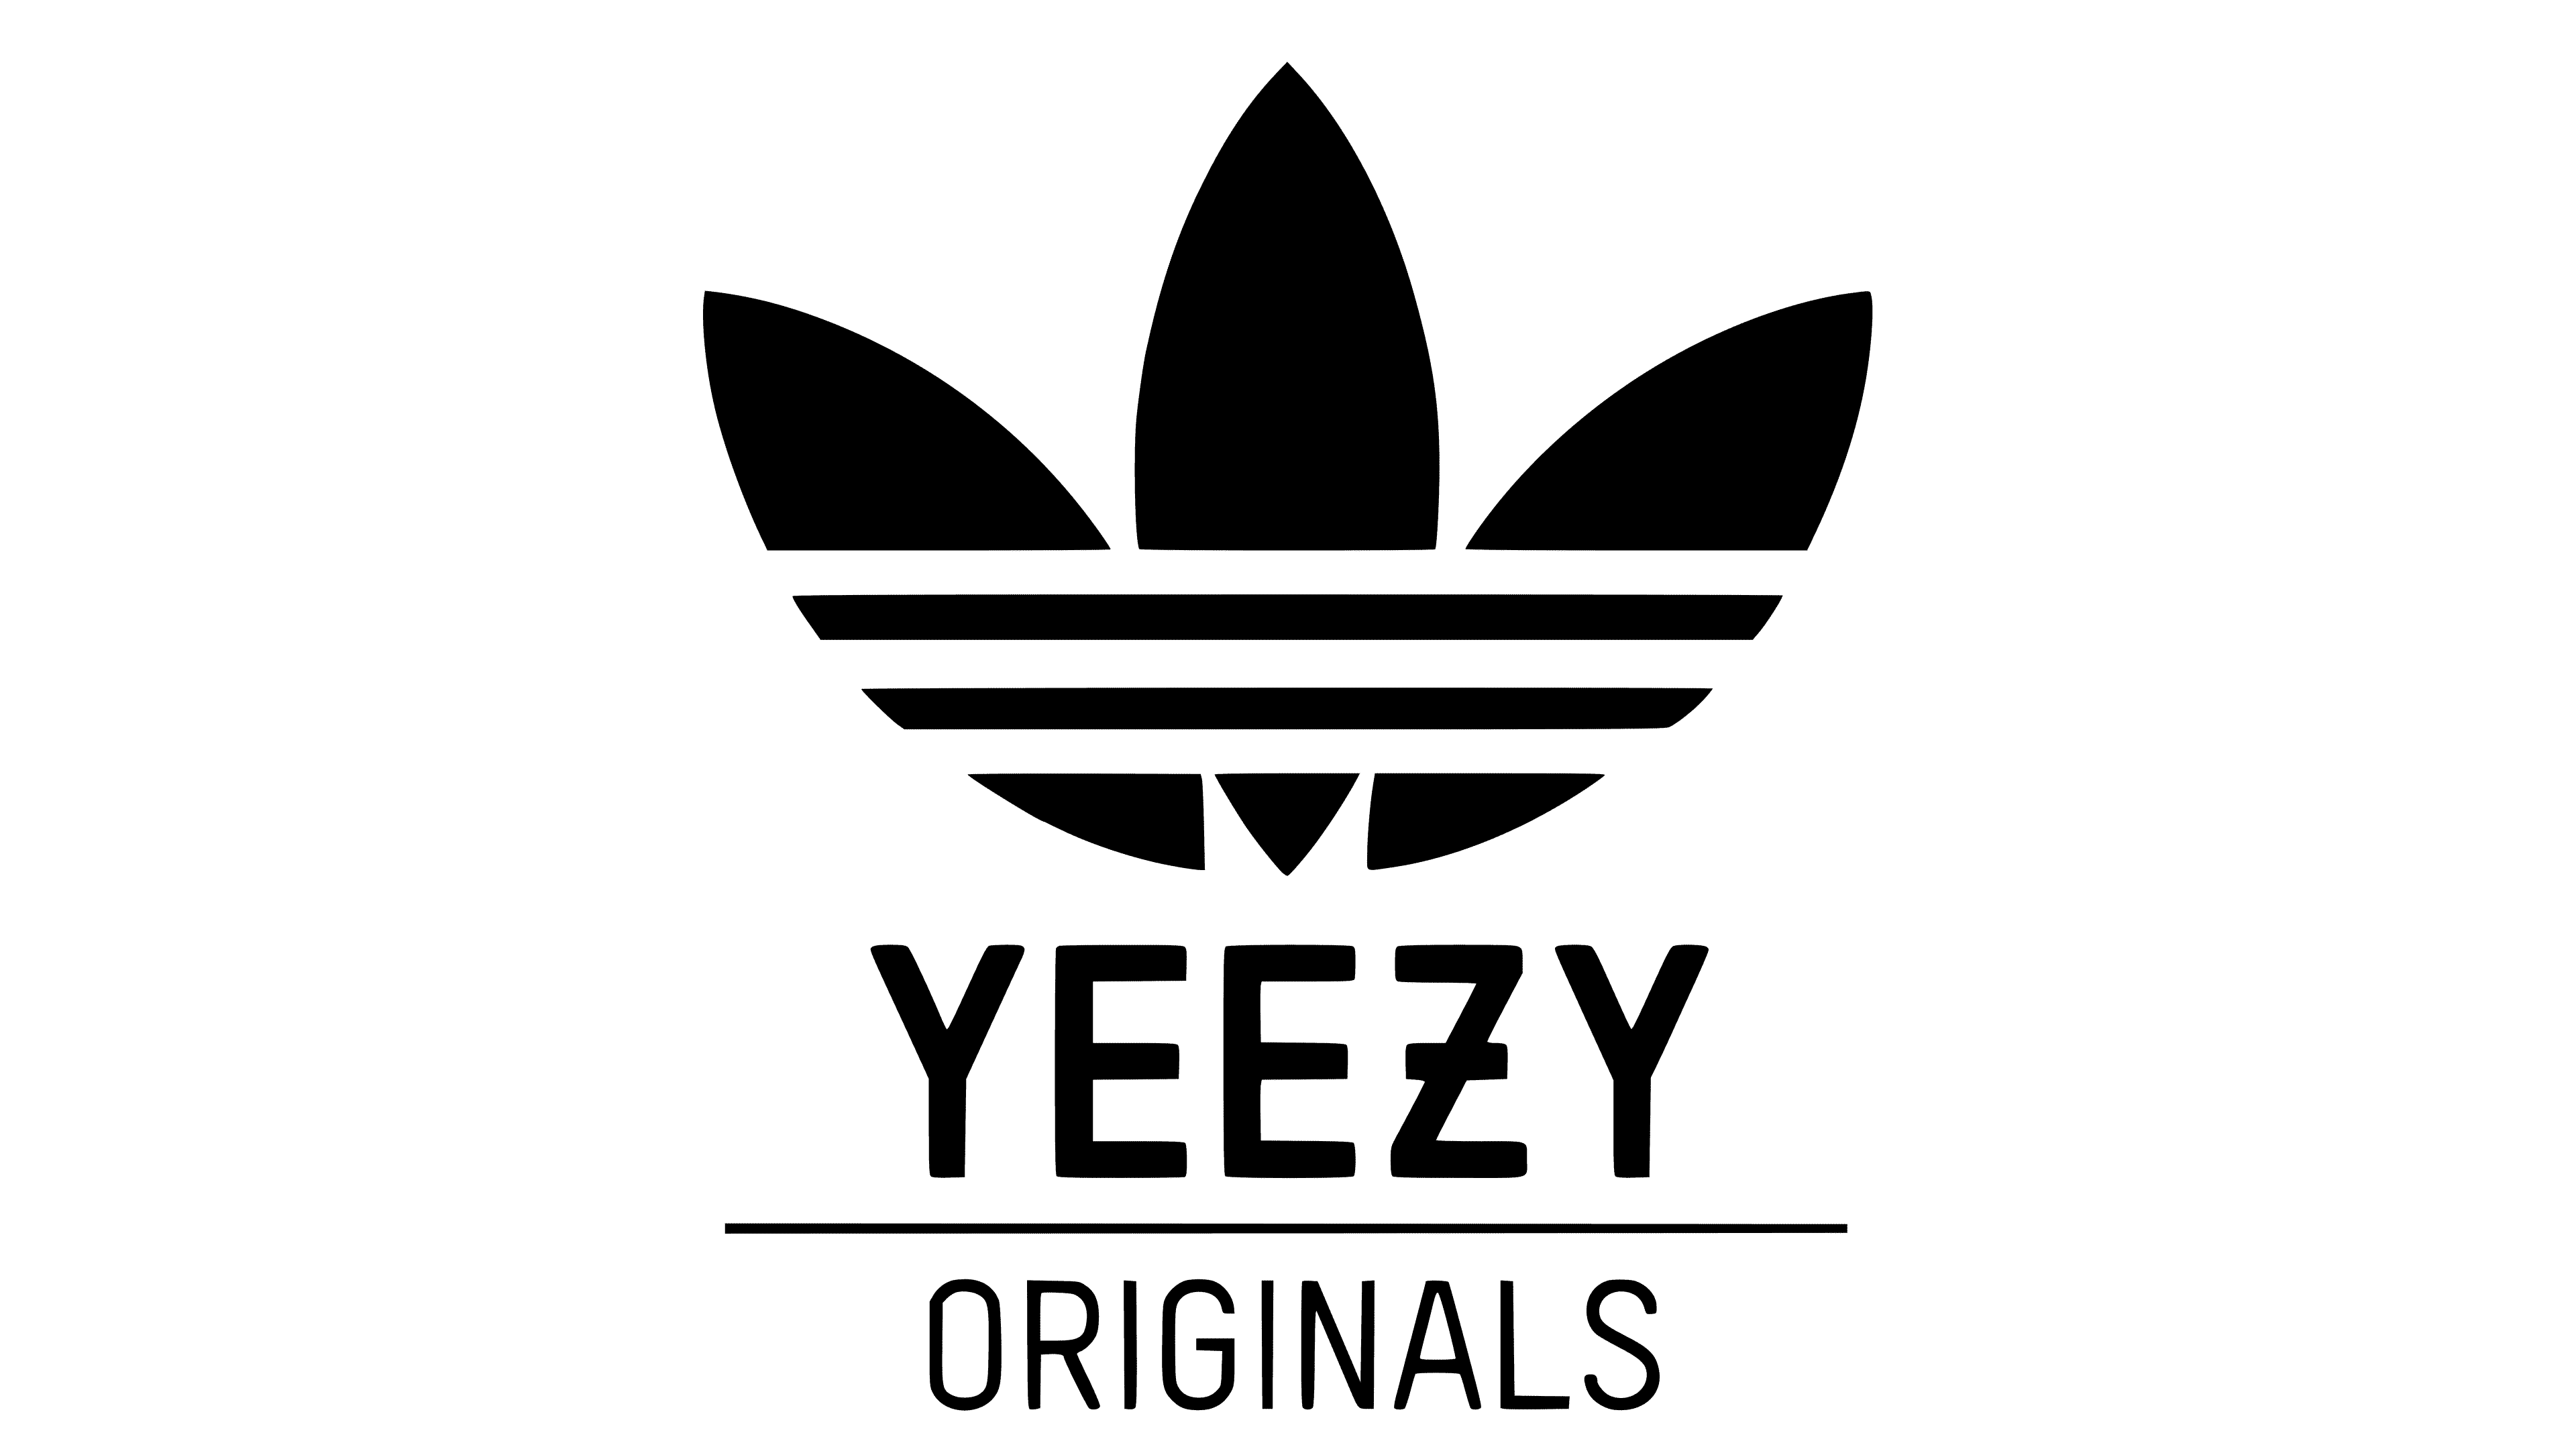 Yeezy Logo | The most famous brands and 